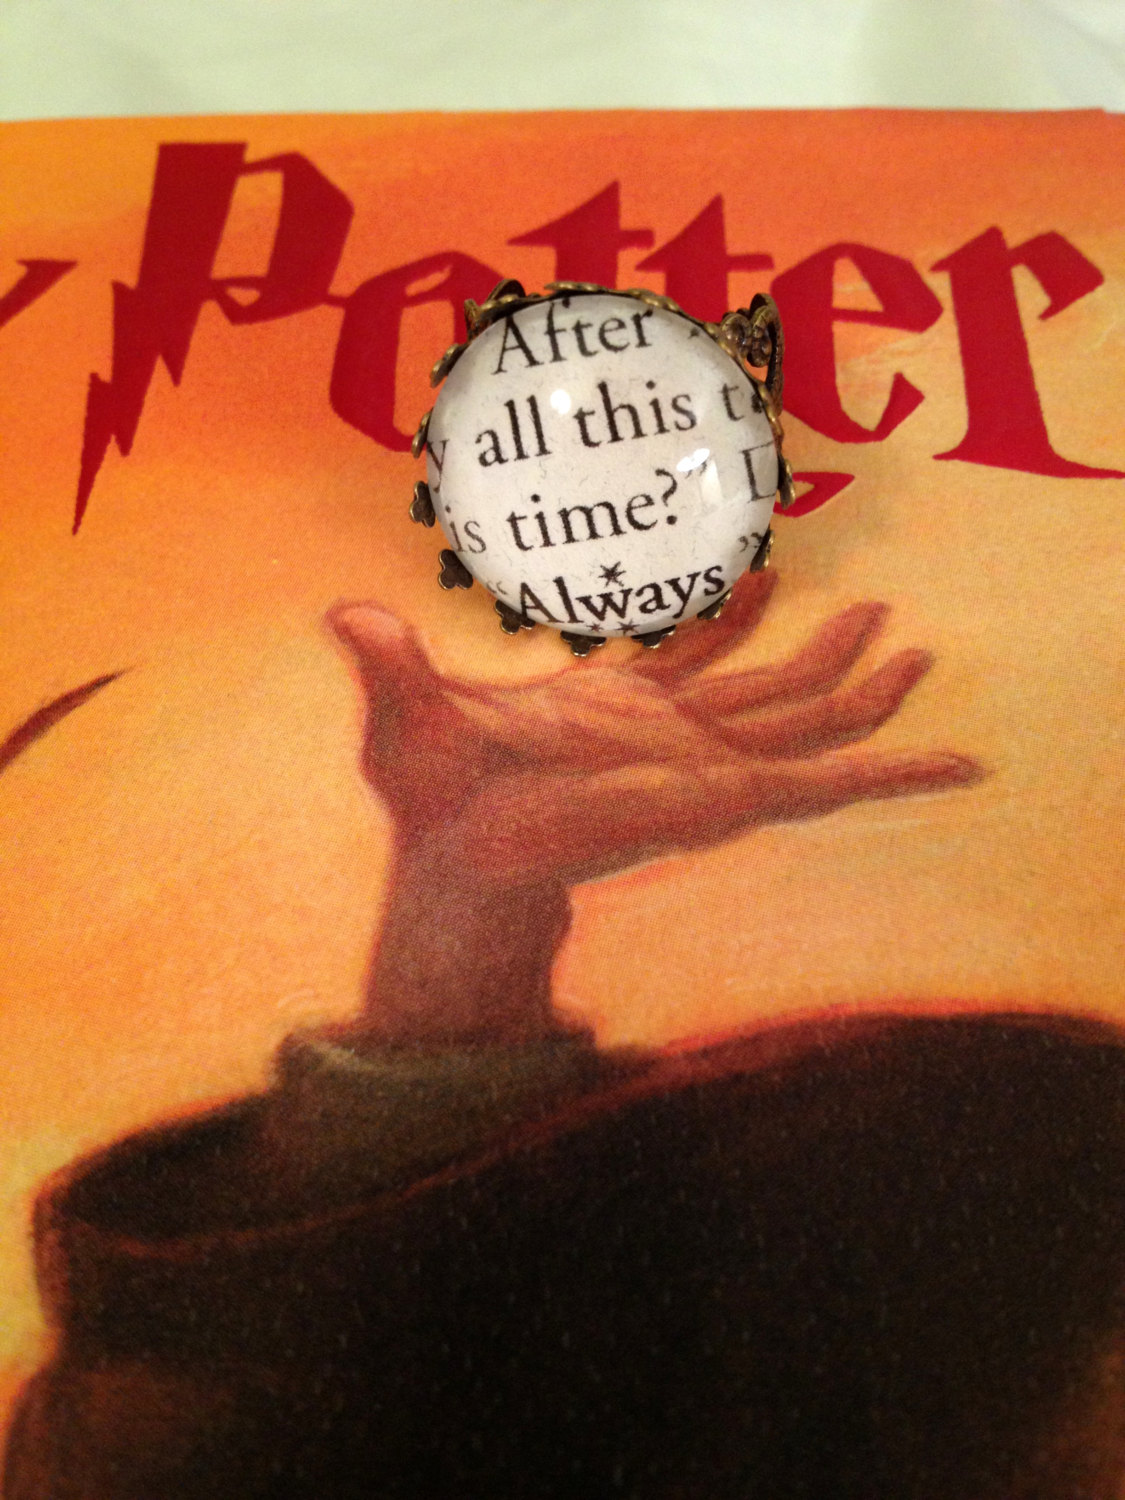 After all this time always